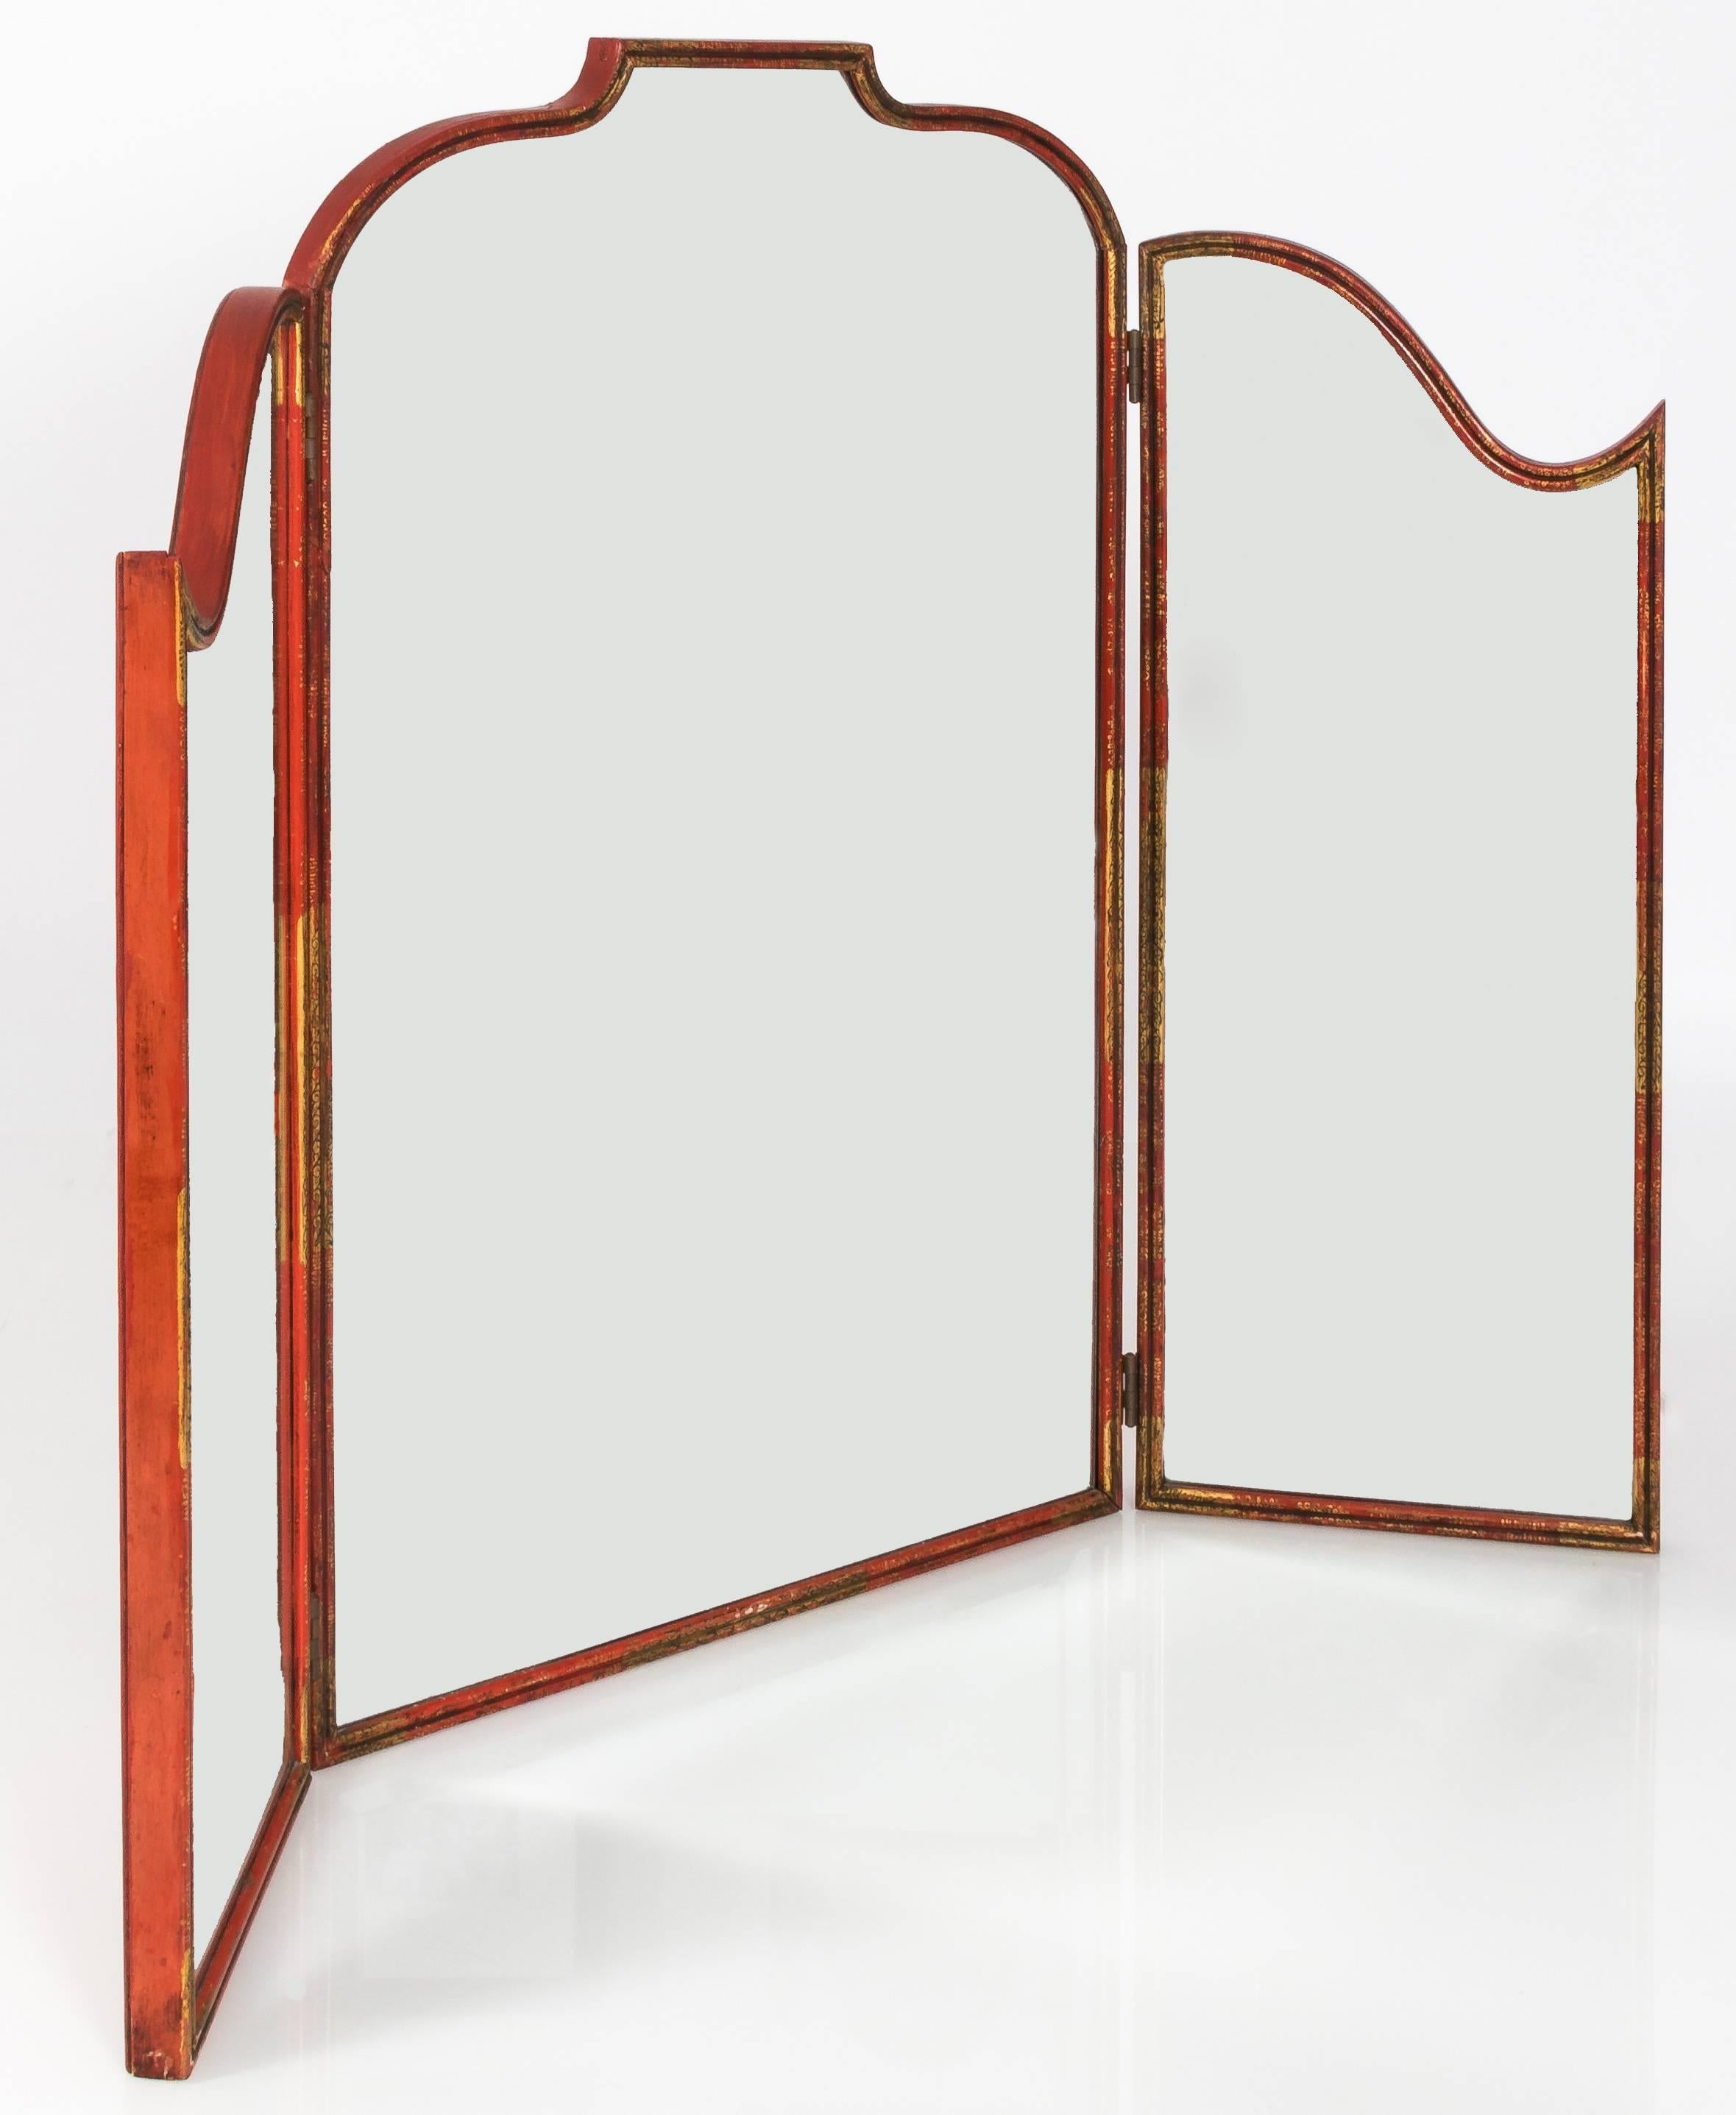 Cinnabar red chinoiserie tri-fold vanity mirror with all-over hand-painted gold detailing. Original beveled mirrored inset glass. Back is painted in cinnabar red lacquer.